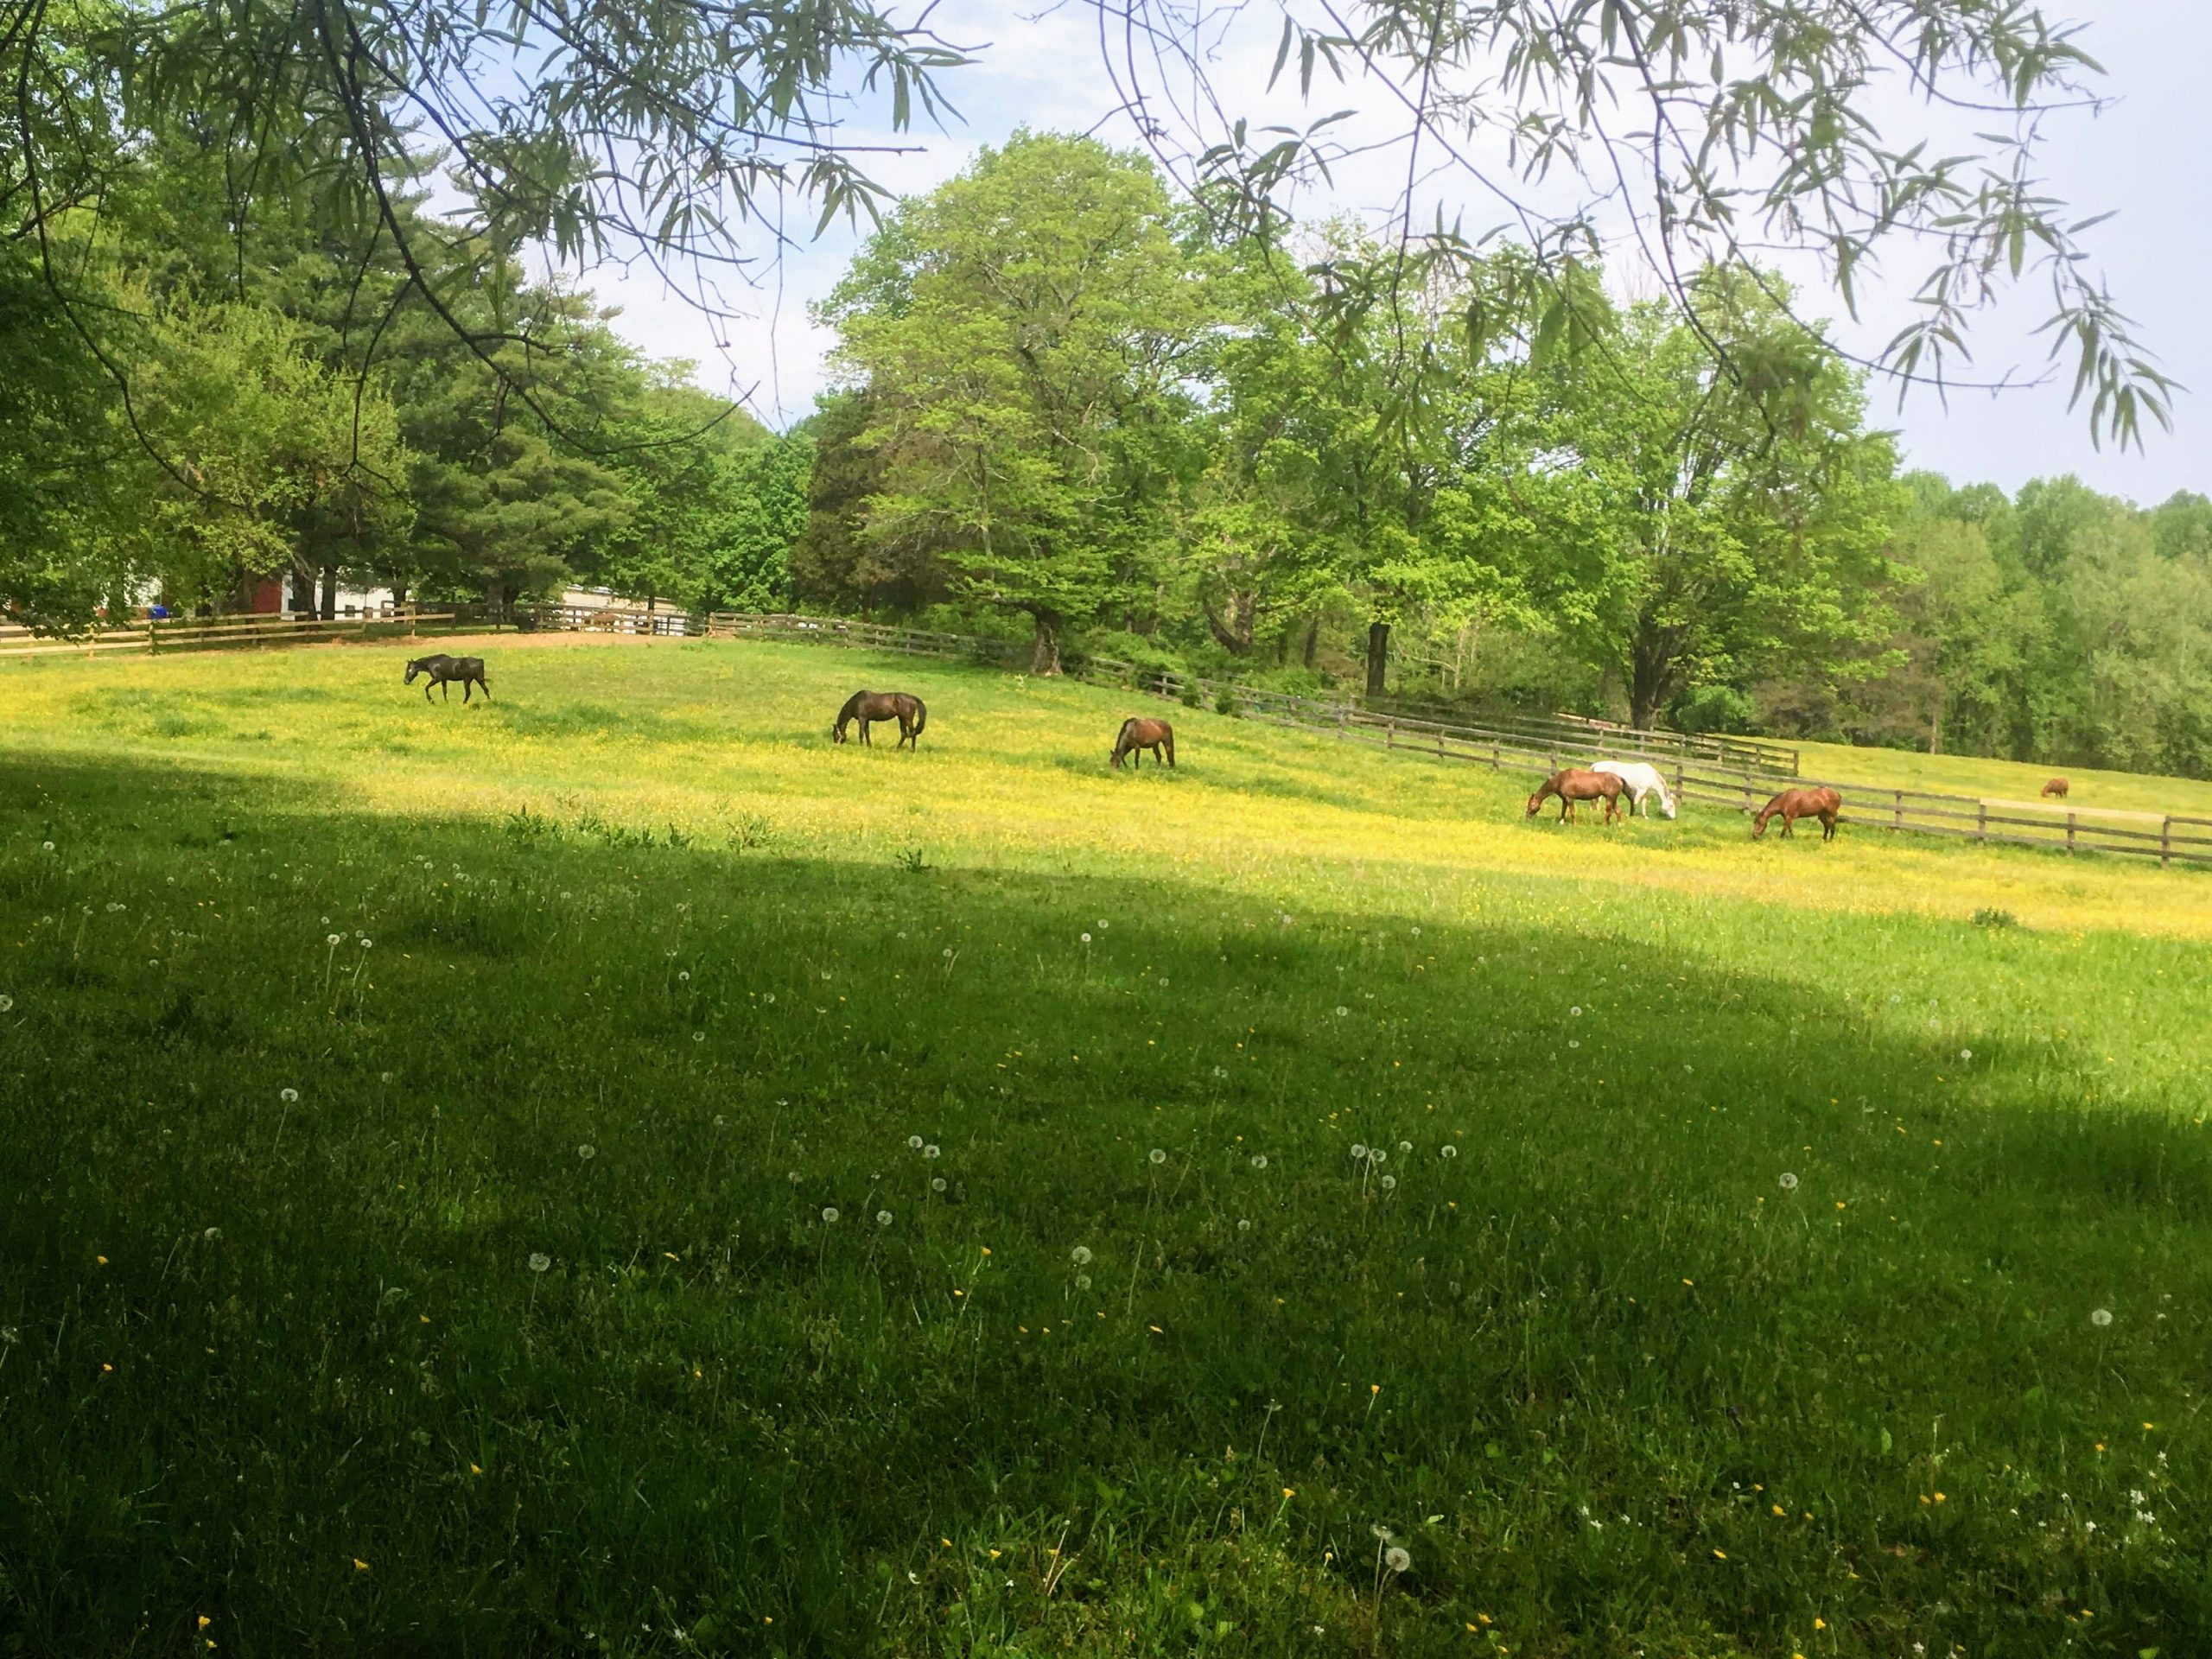 A wide shot of an open, grassy field shows horses freely grazing on a sunny day.